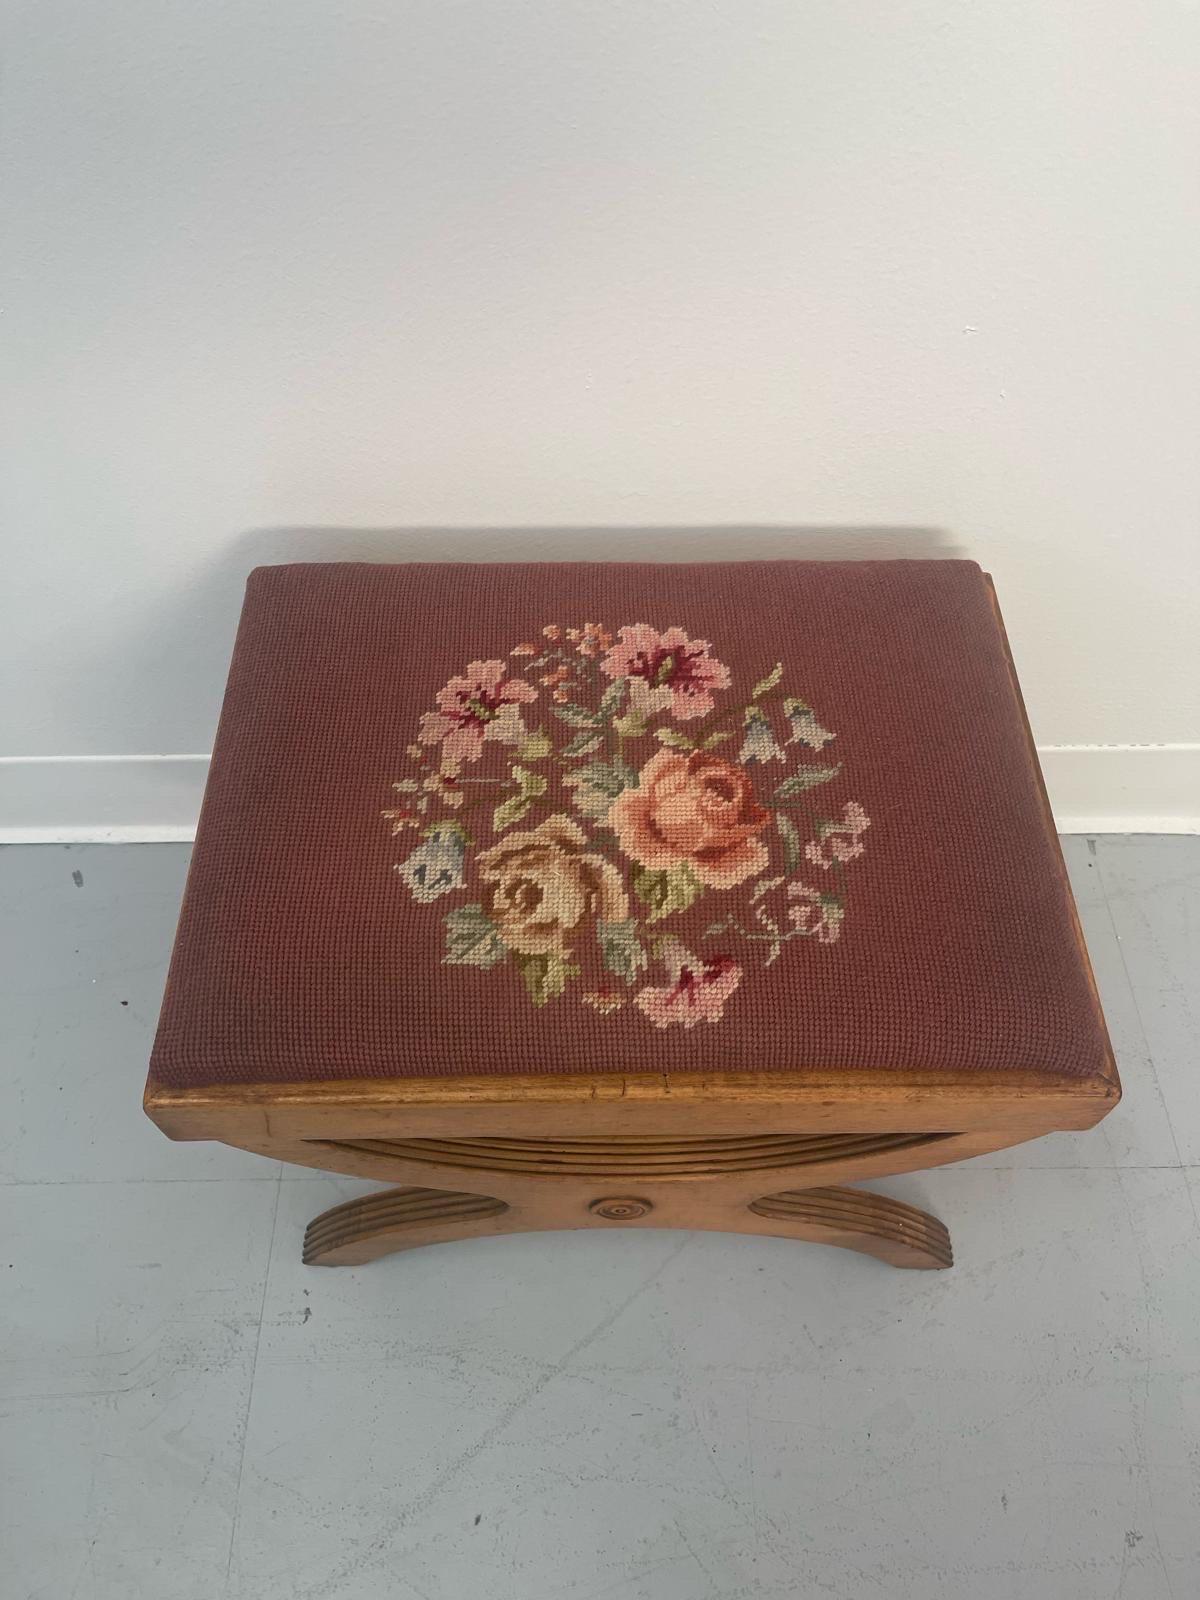 Vintage Needlepoint Embroidery Footstool With Floral Motif For Sale 2